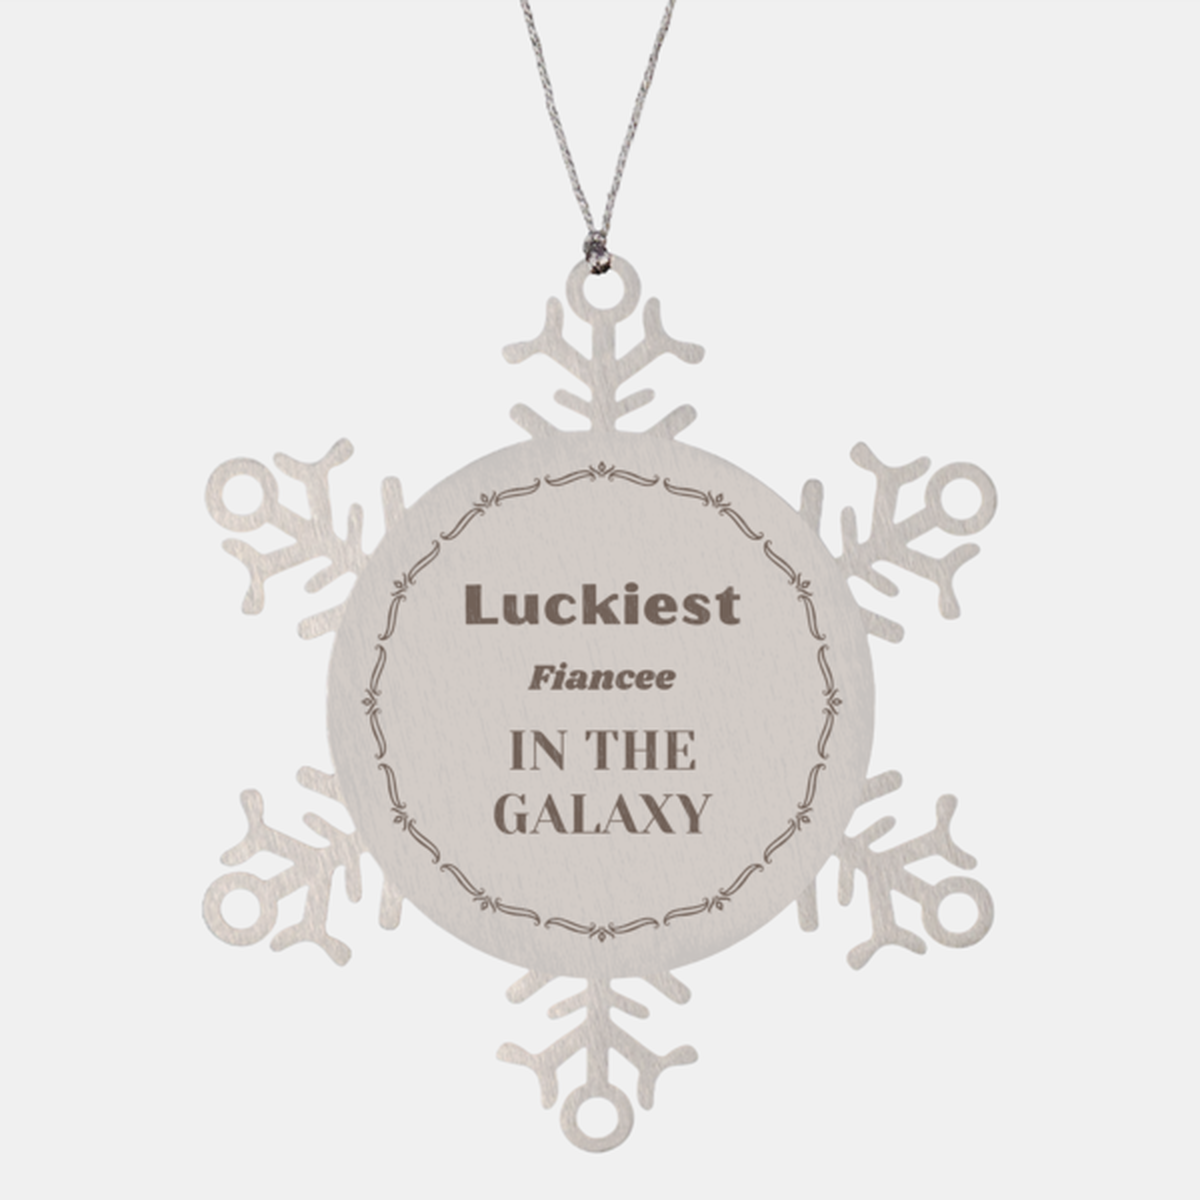 Luckiest Fiancee in the Galaxy, To My Fiancee Ornament Gifts, Christmas Fiancee Snowflake Ornament Gifts, X-mas Decorations Unique Gifts For Fiancee Men Women